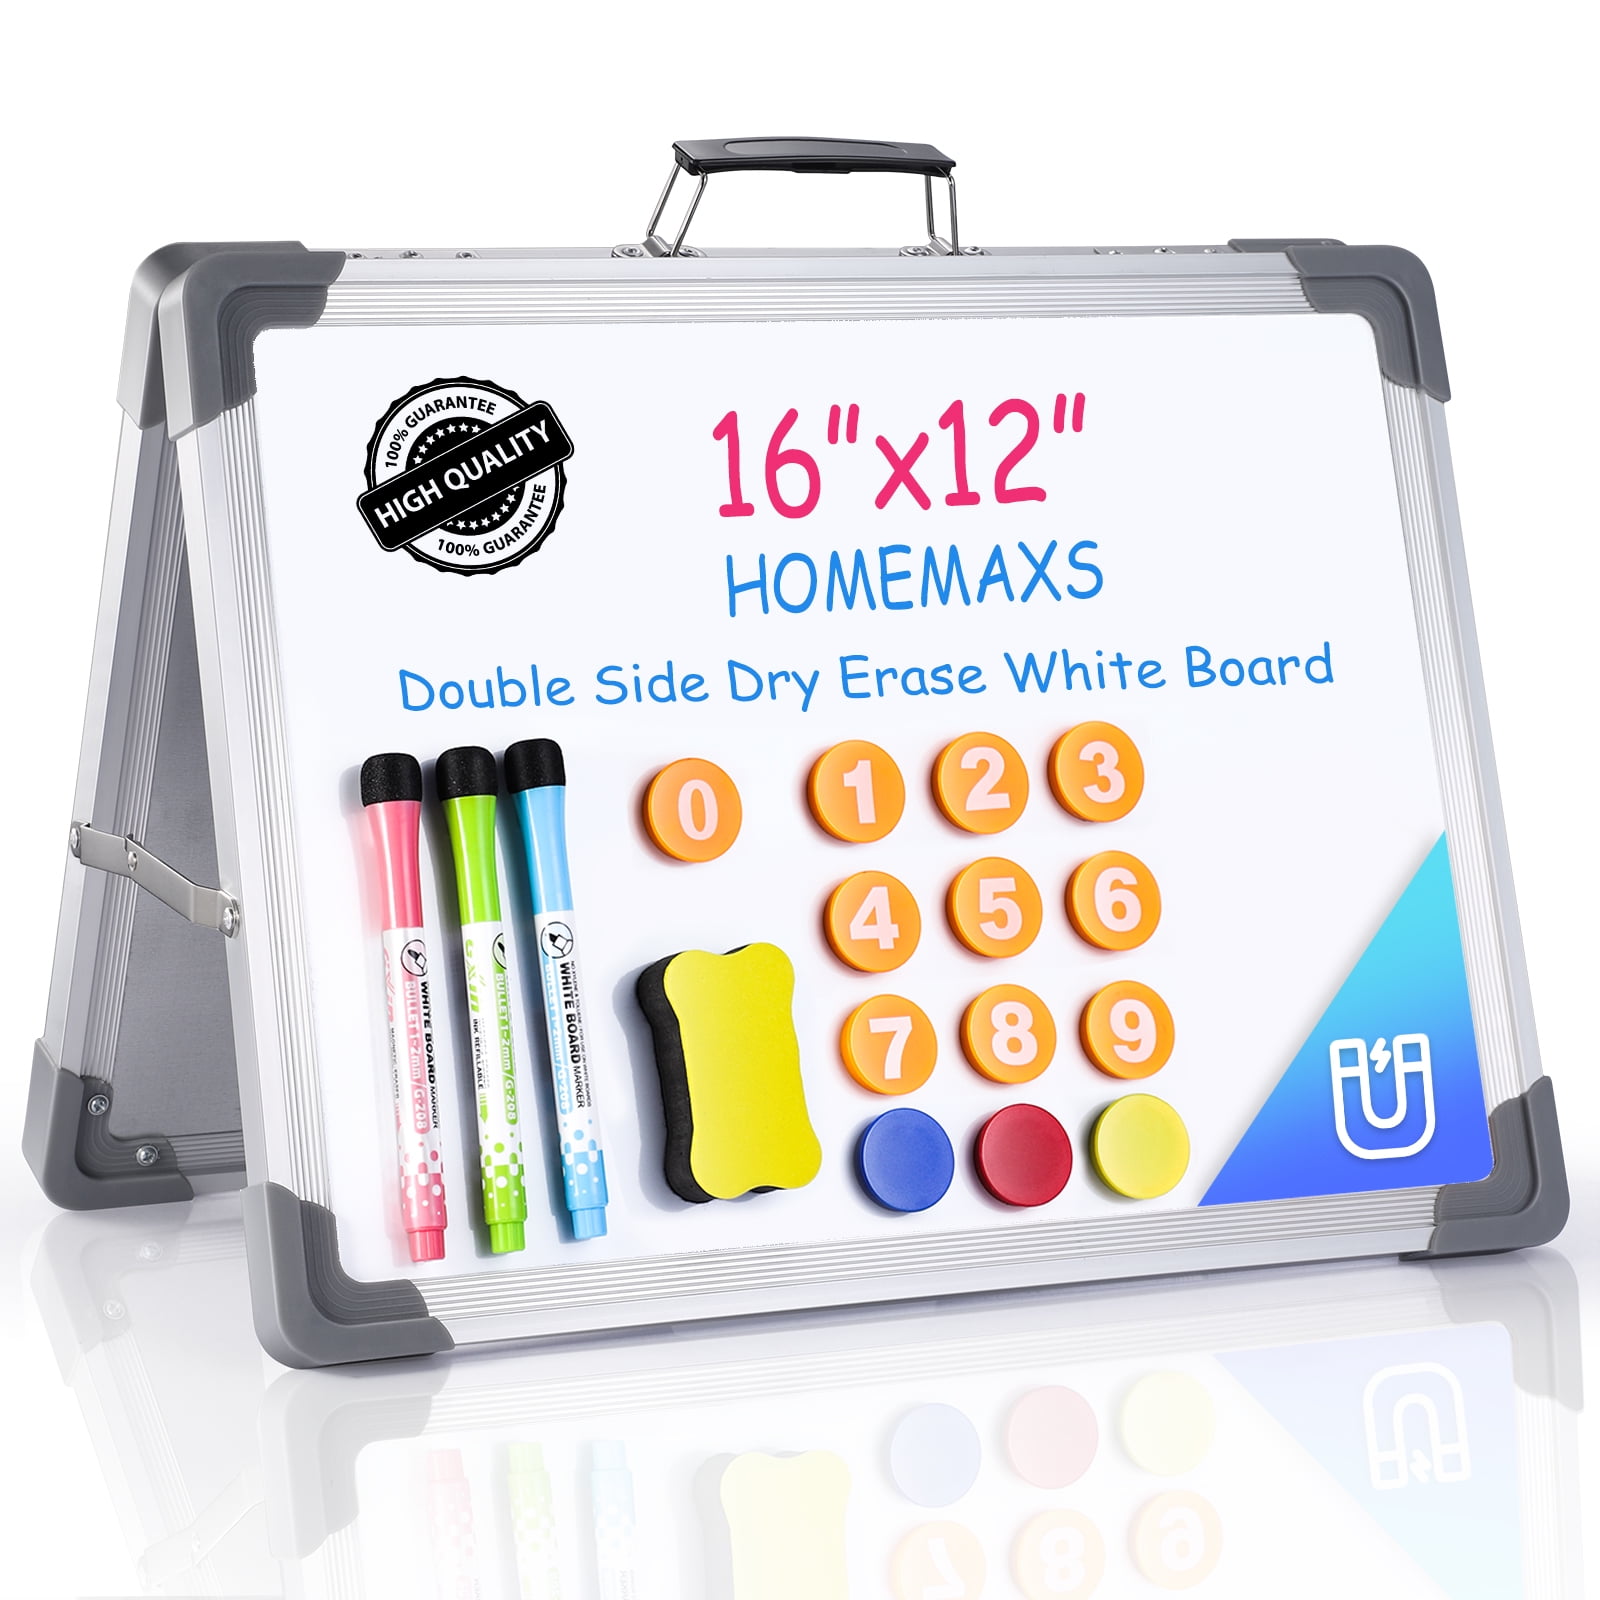 Details about   Small Dry Erase White Board Magnetic Desktop Foldable Whiteboard Portable Mi 